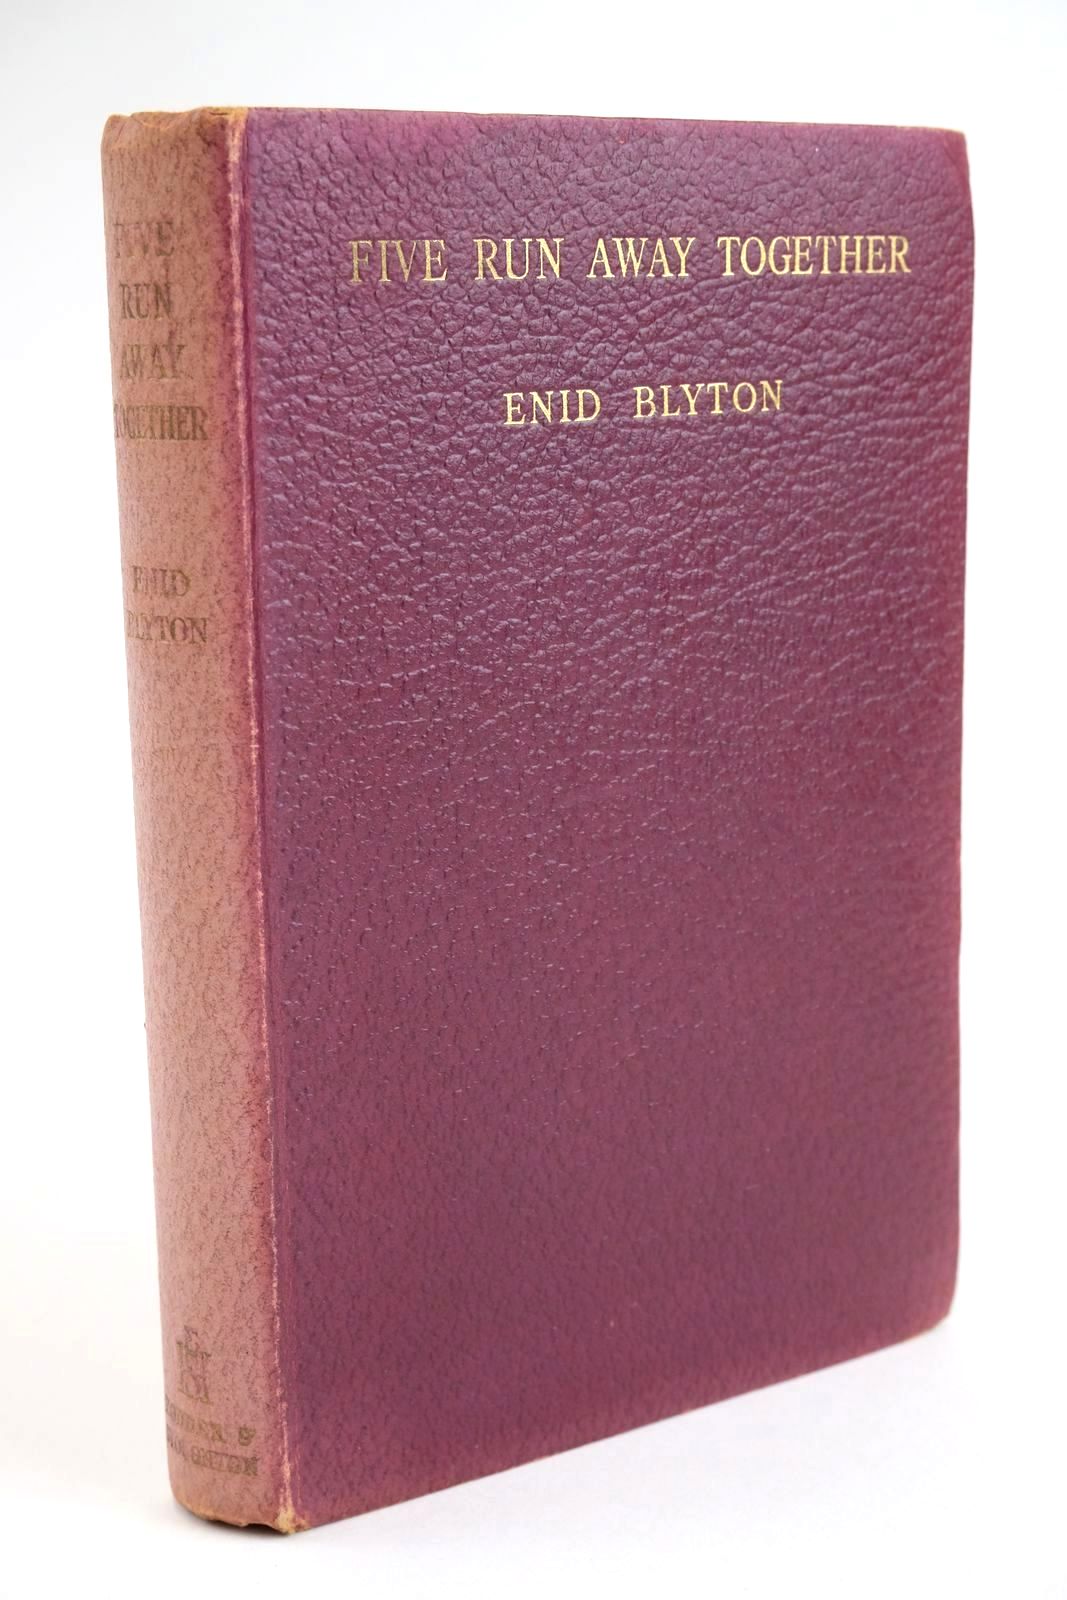 Photo of FIVE RUN AWAY TOGETHER written by Blyton, Enid illustrated by Soper, Eileen published by Hodder &amp; Stoughton (STOCK CODE: 1328055)  for sale by Stella & Rose's Books